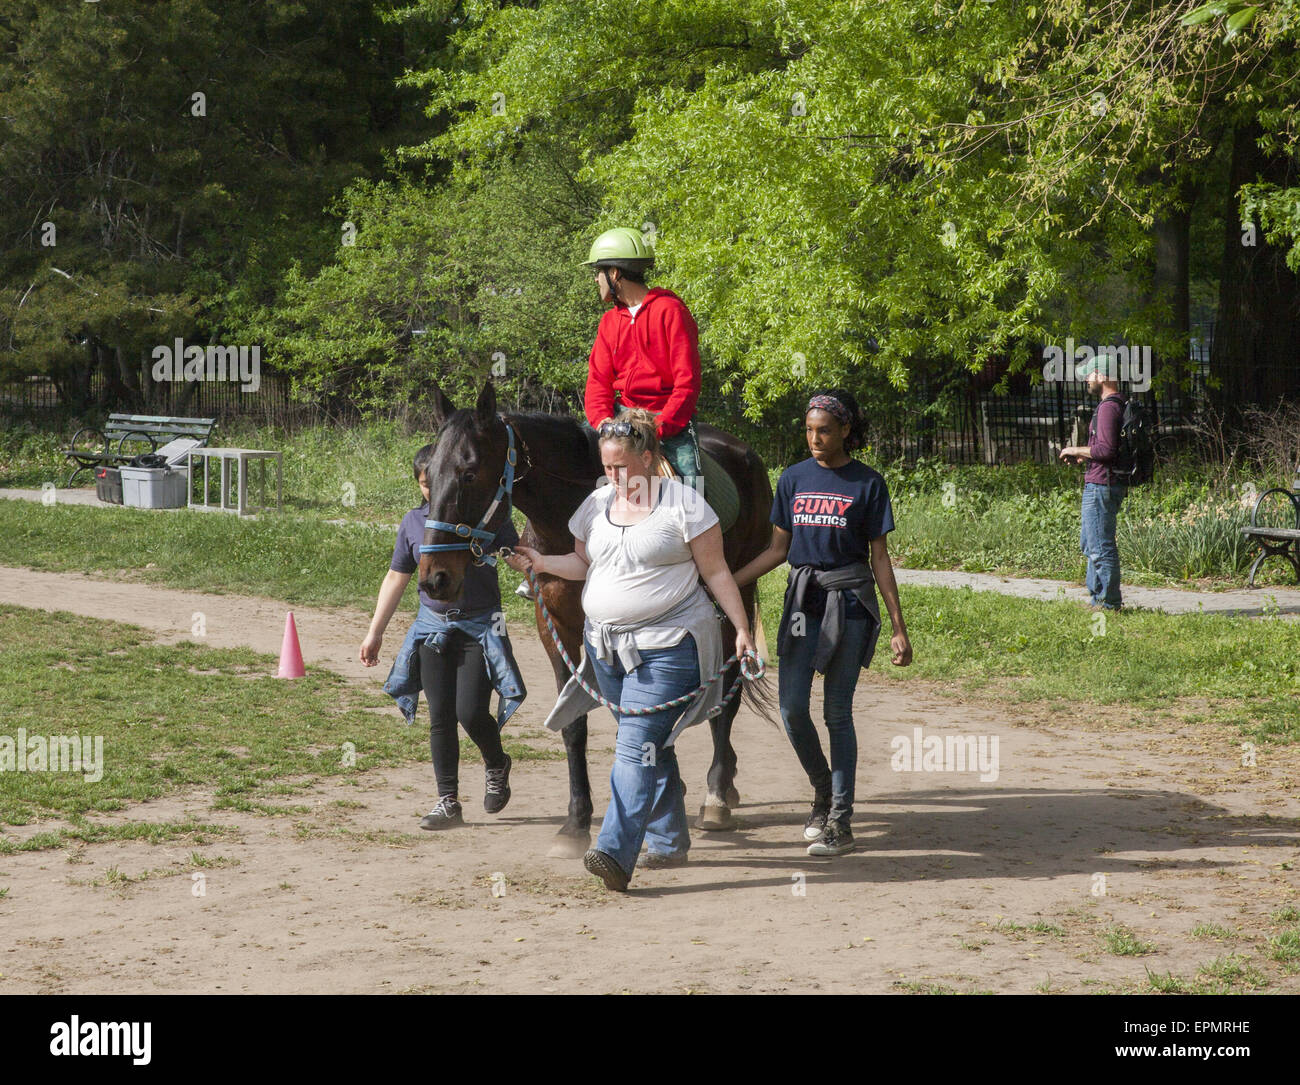 Disabled children receive developmental therapy learning to ride horses, known as Hippotherapy. Prospect Park, Brooklyn, NY Stock Photo